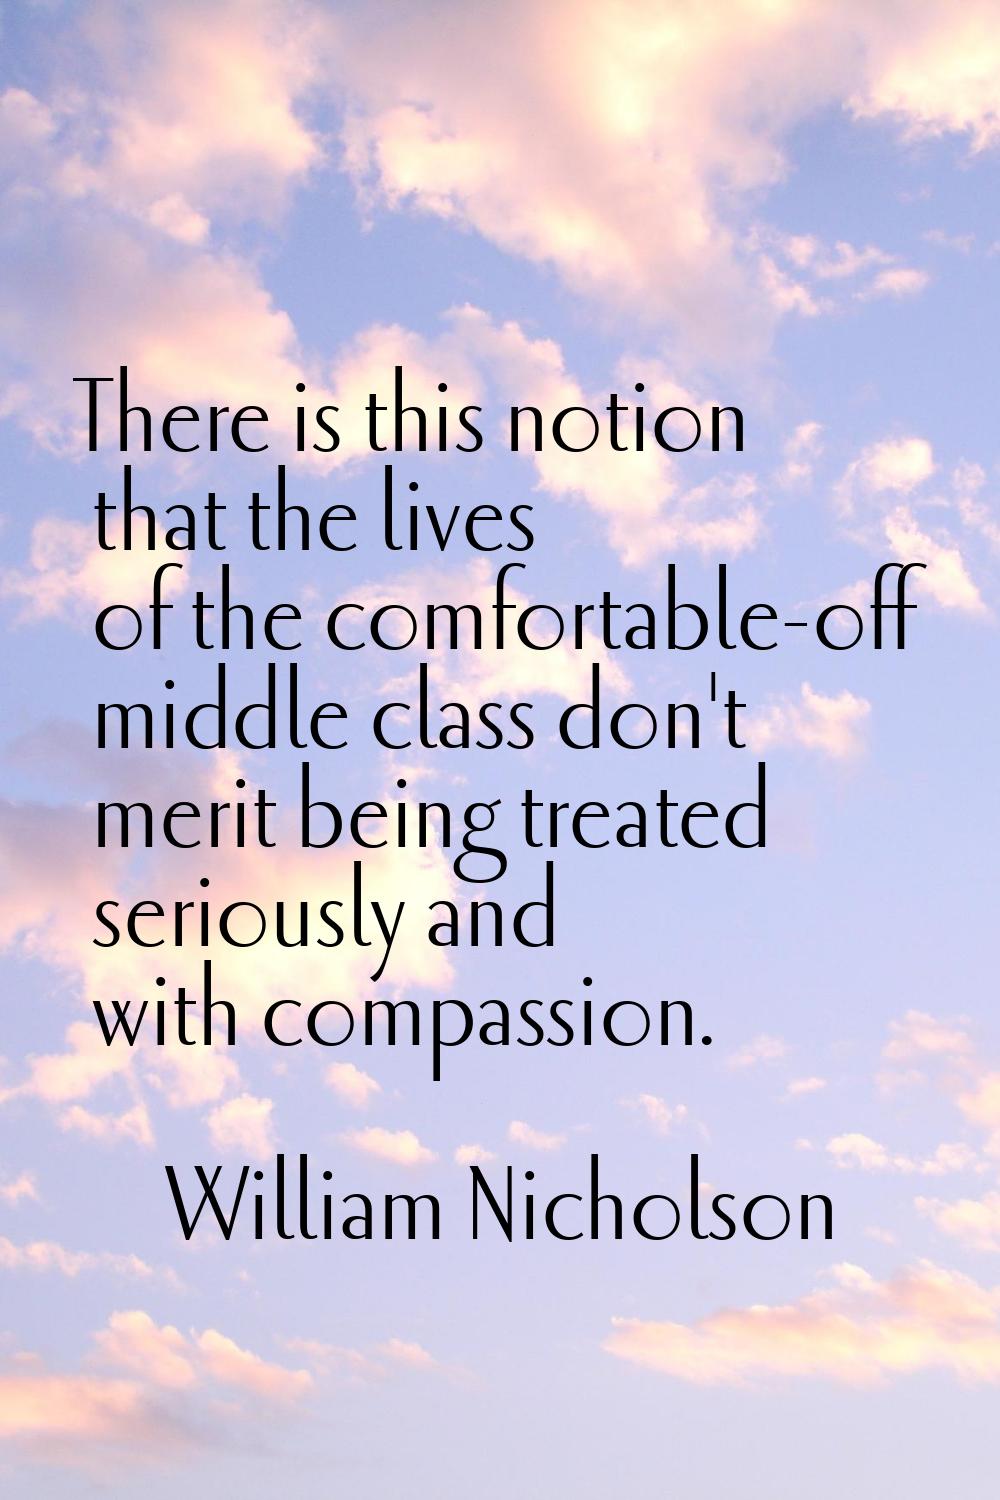 There is this notion that the lives of the comfortable-off middle class don't merit being treated s